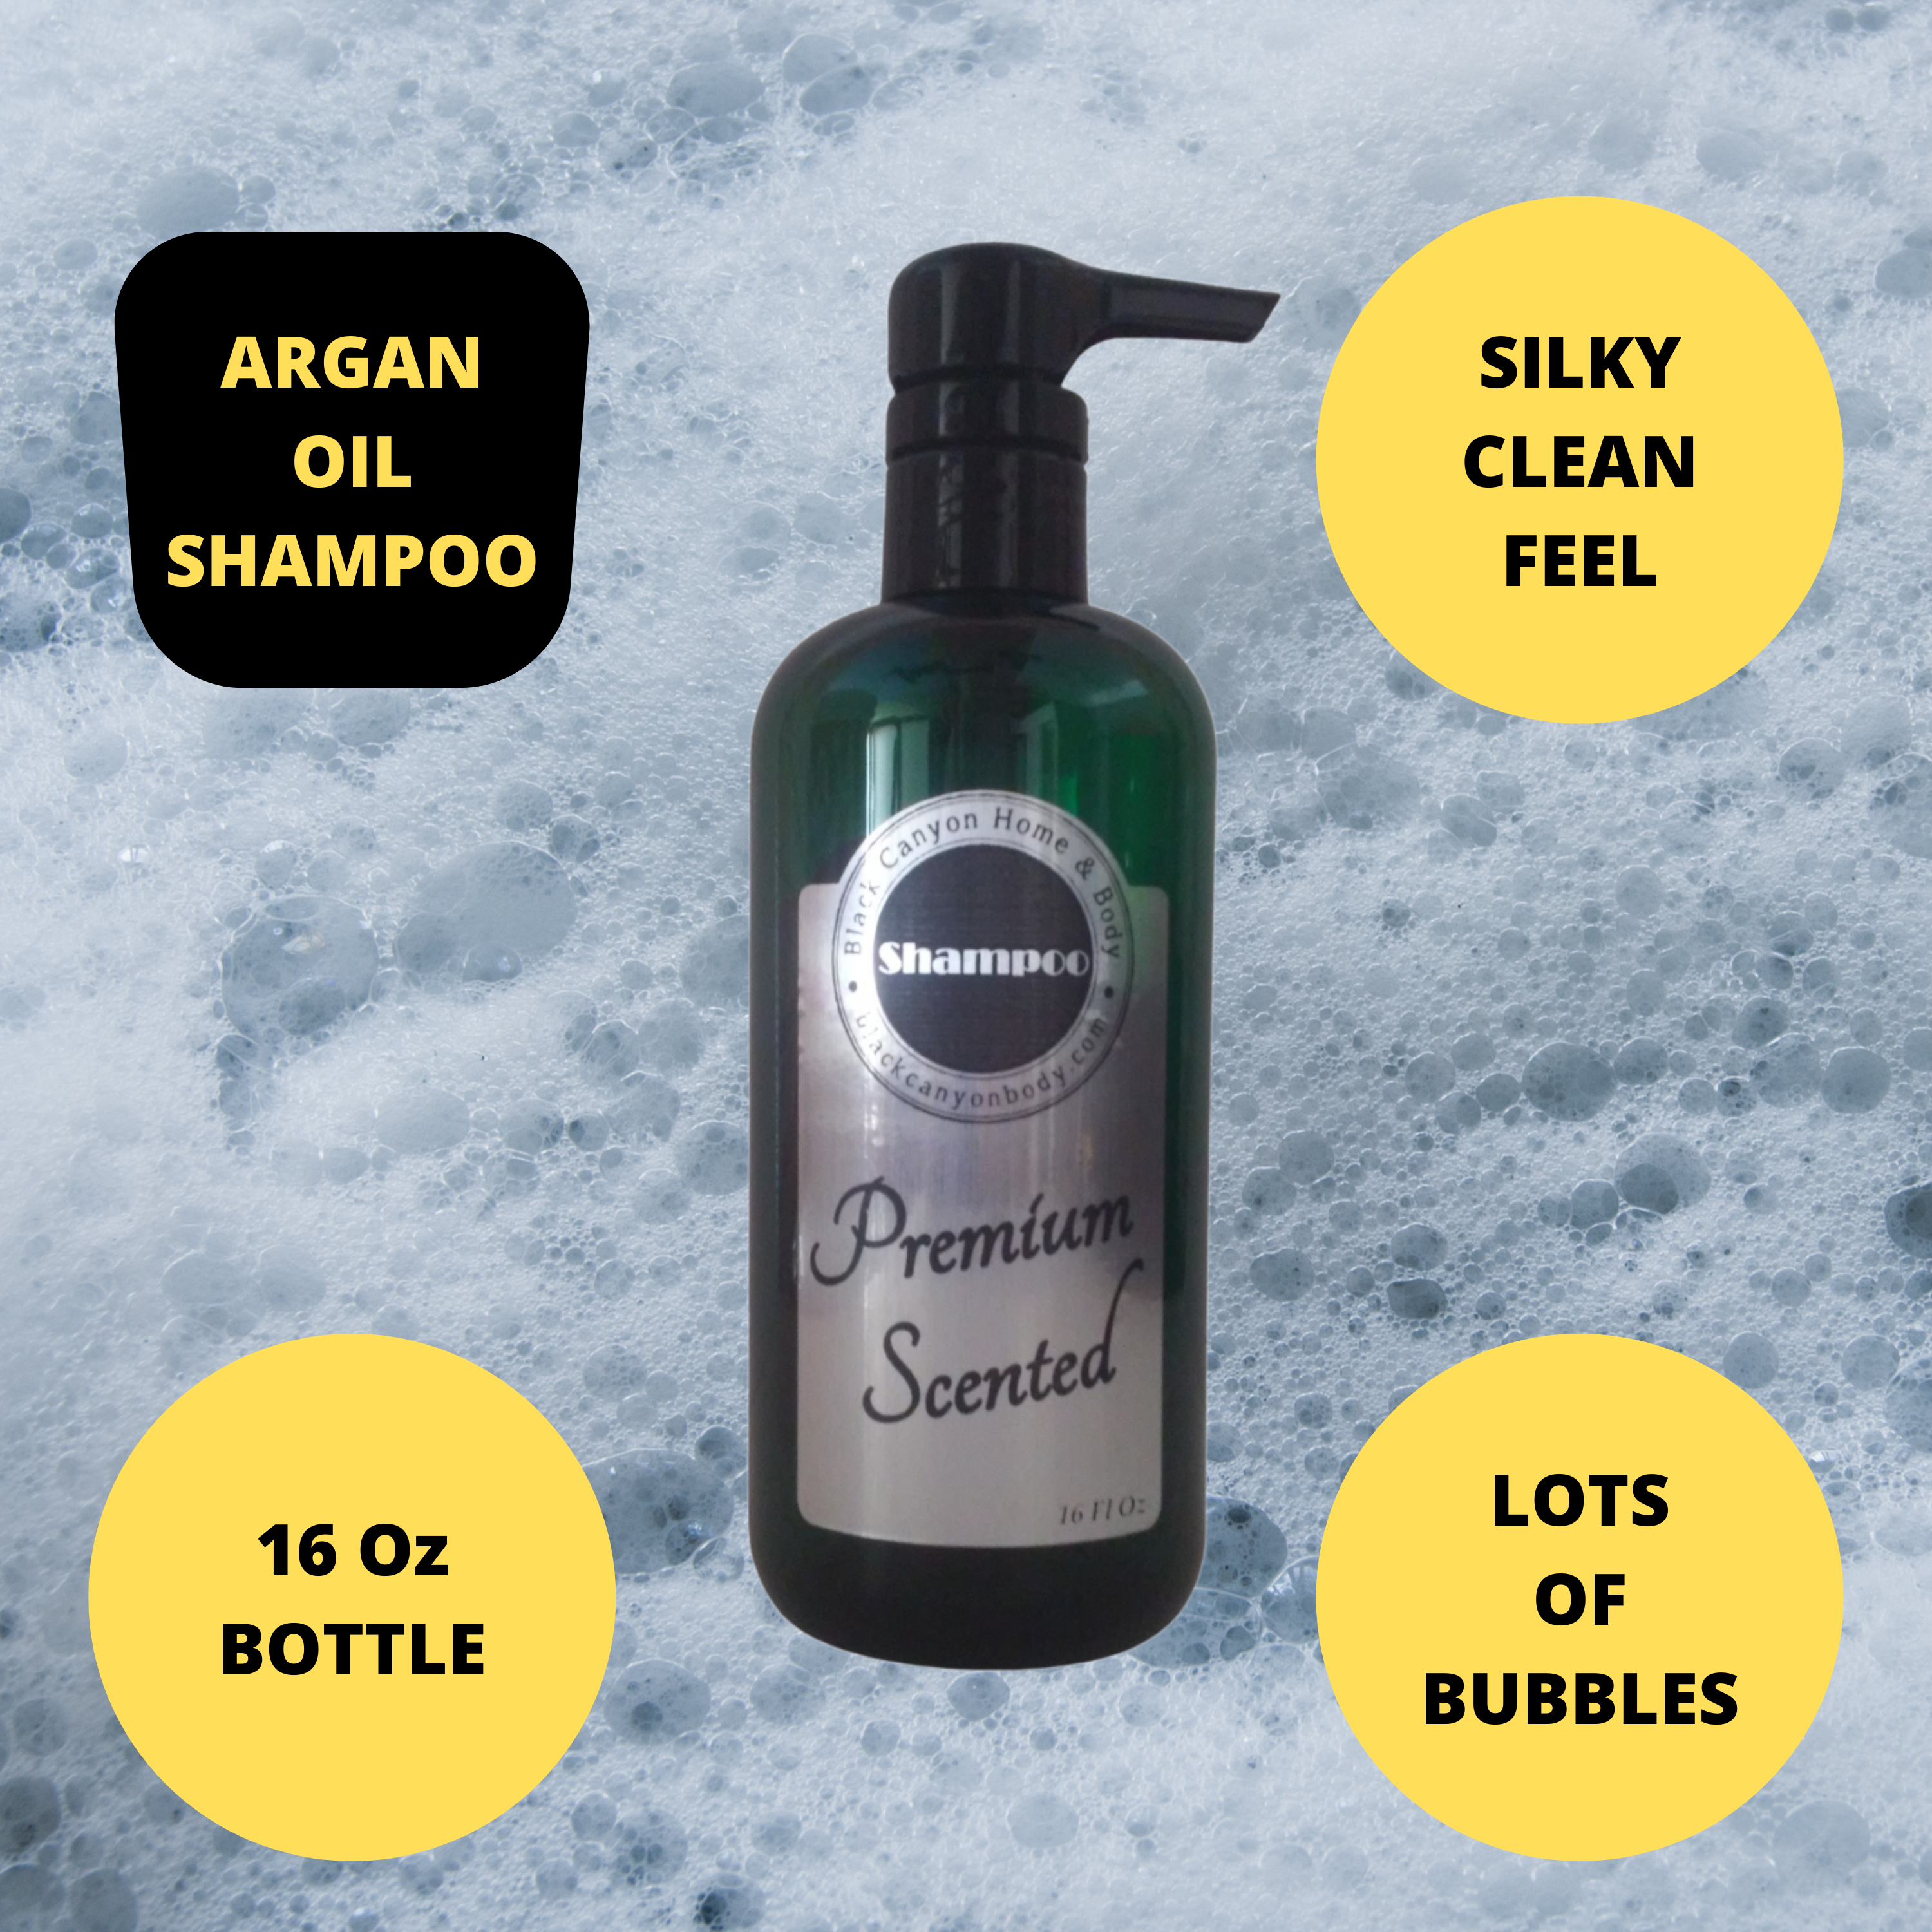 Black Canyon Berry Passion Scented Shampoo with Argan Oil